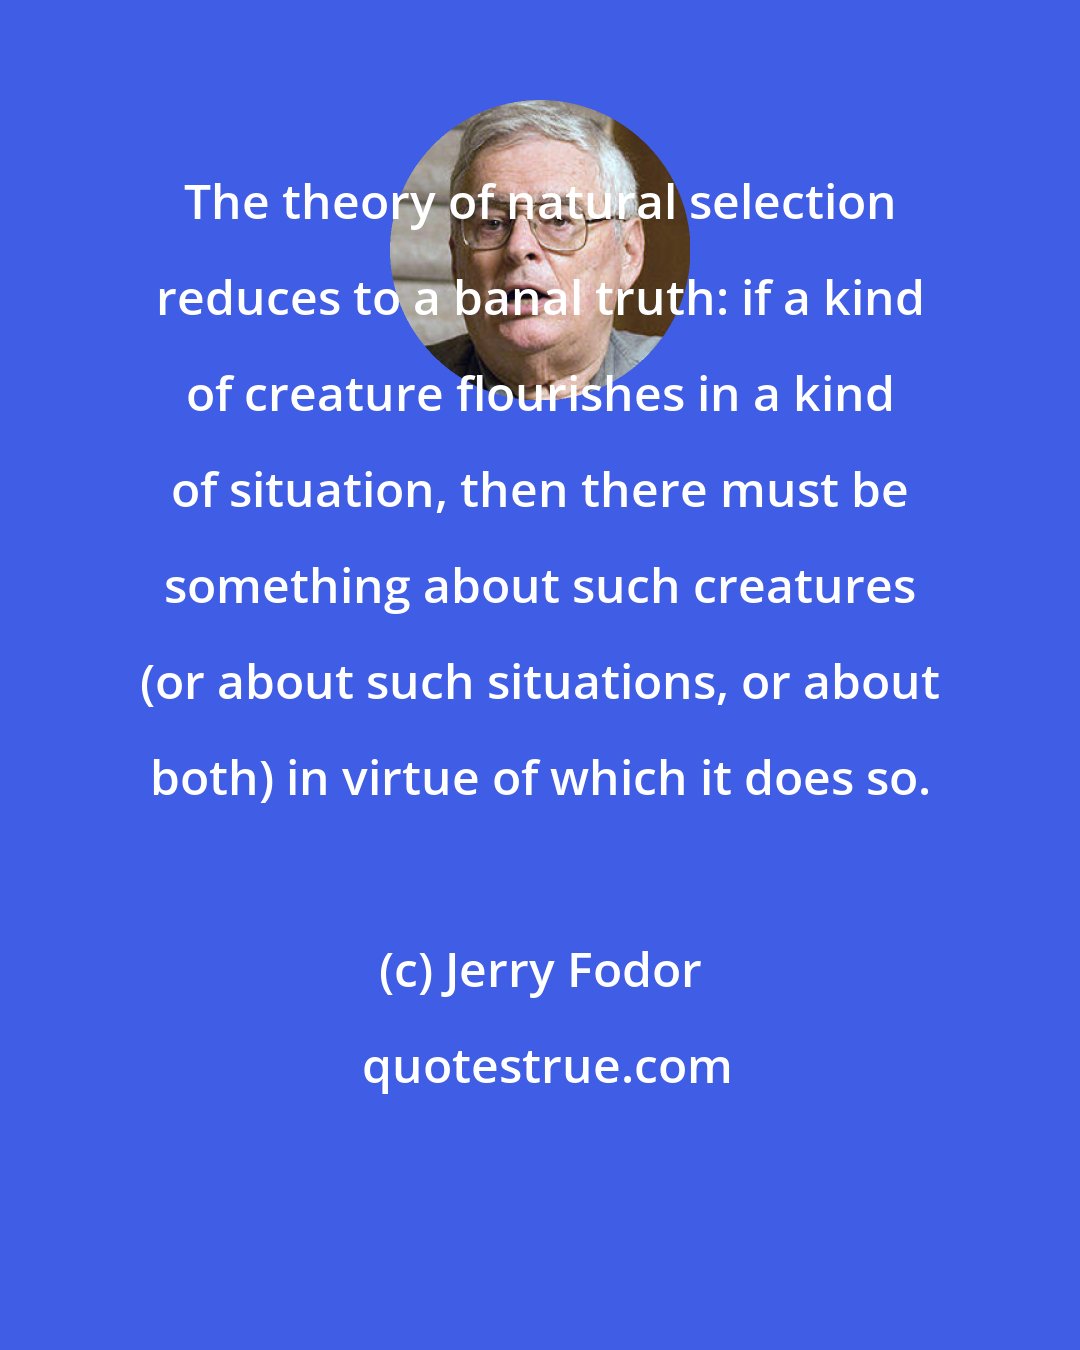 Jerry Fodor: The theory of natural selection reduces to a banal truth: if a kind of creature flourishes in a kind of situation, then there must be something about such creatures (or about such situations, or about both) in virtue of which it does so.